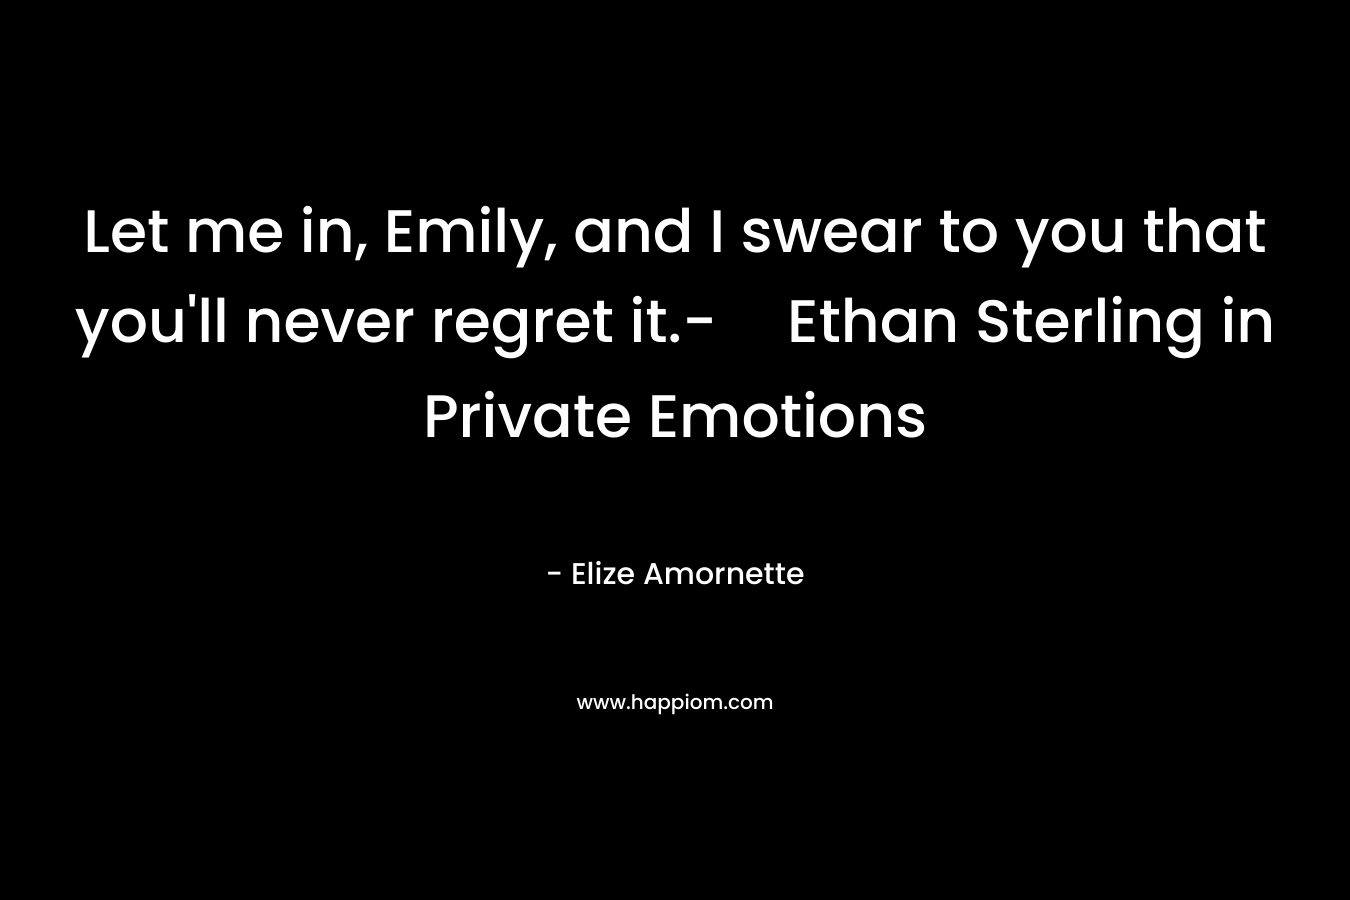 Let me in, Emily, and I swear to you that you'll never regret it.-Ethan Sterling in Private Emotions